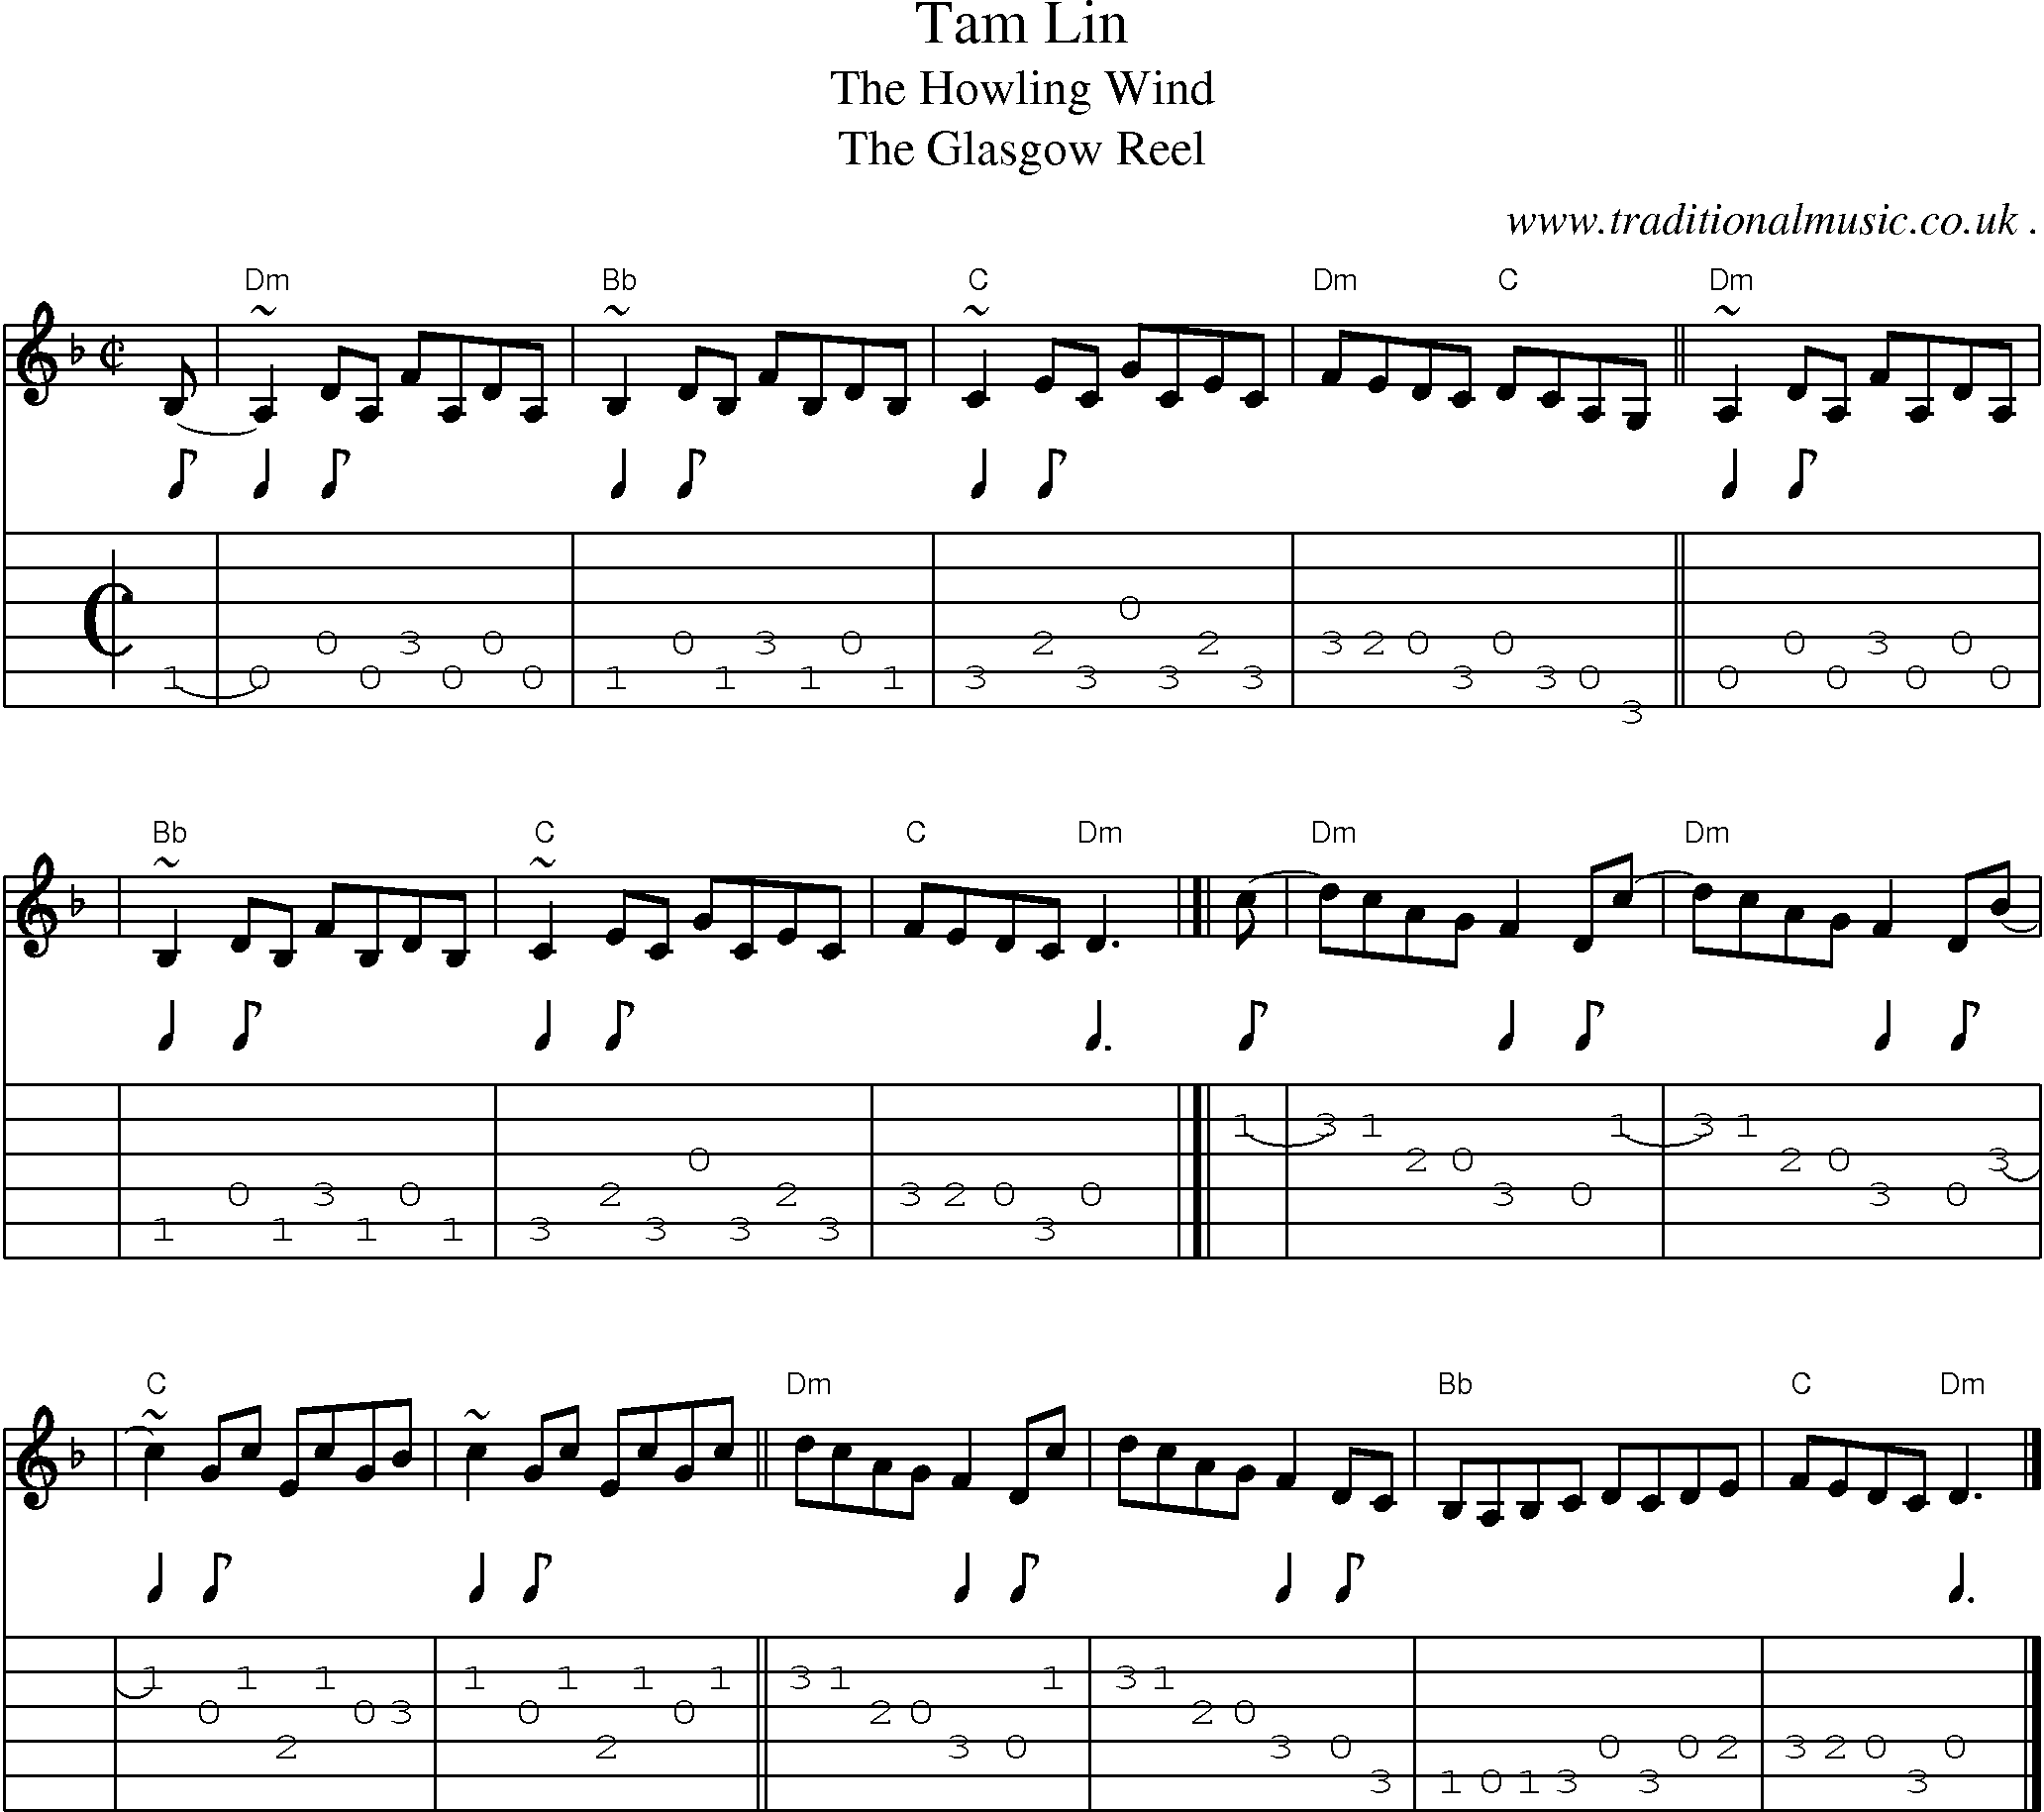 Sheet-music  score, Chords and Guitar Tabs for Tam Lin